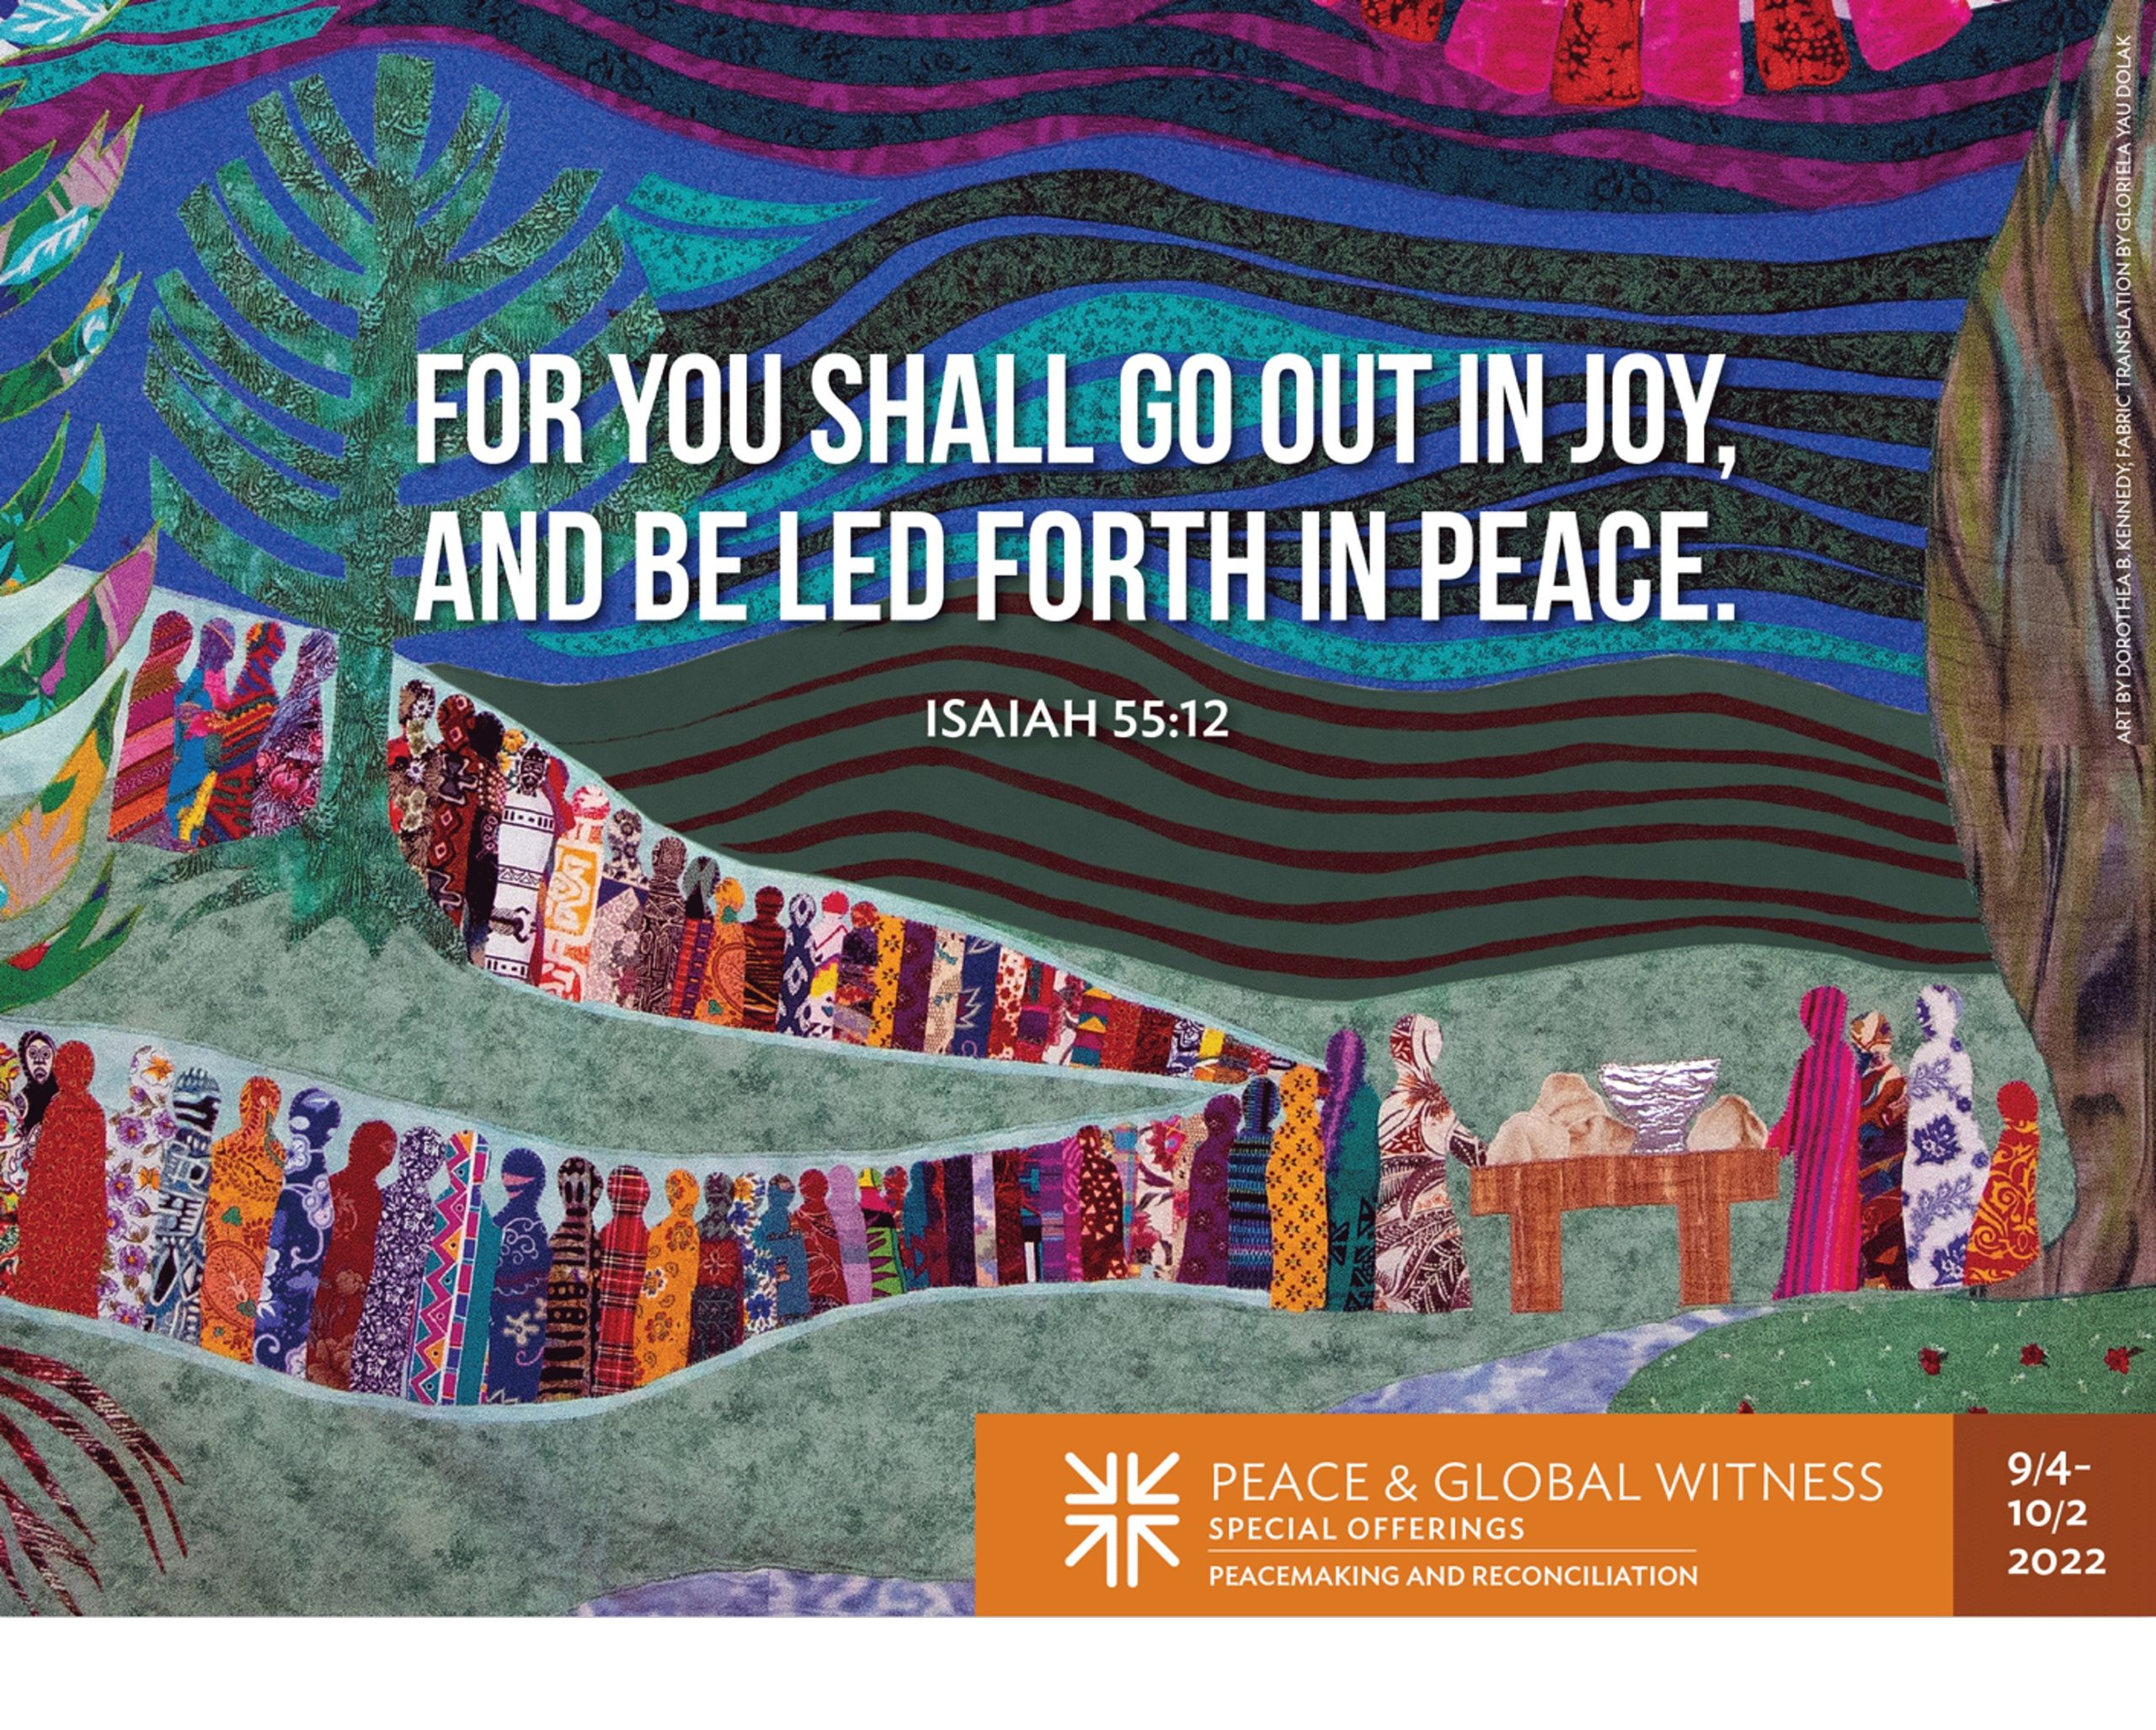 Go Out in Joy, Led Forth in Peace